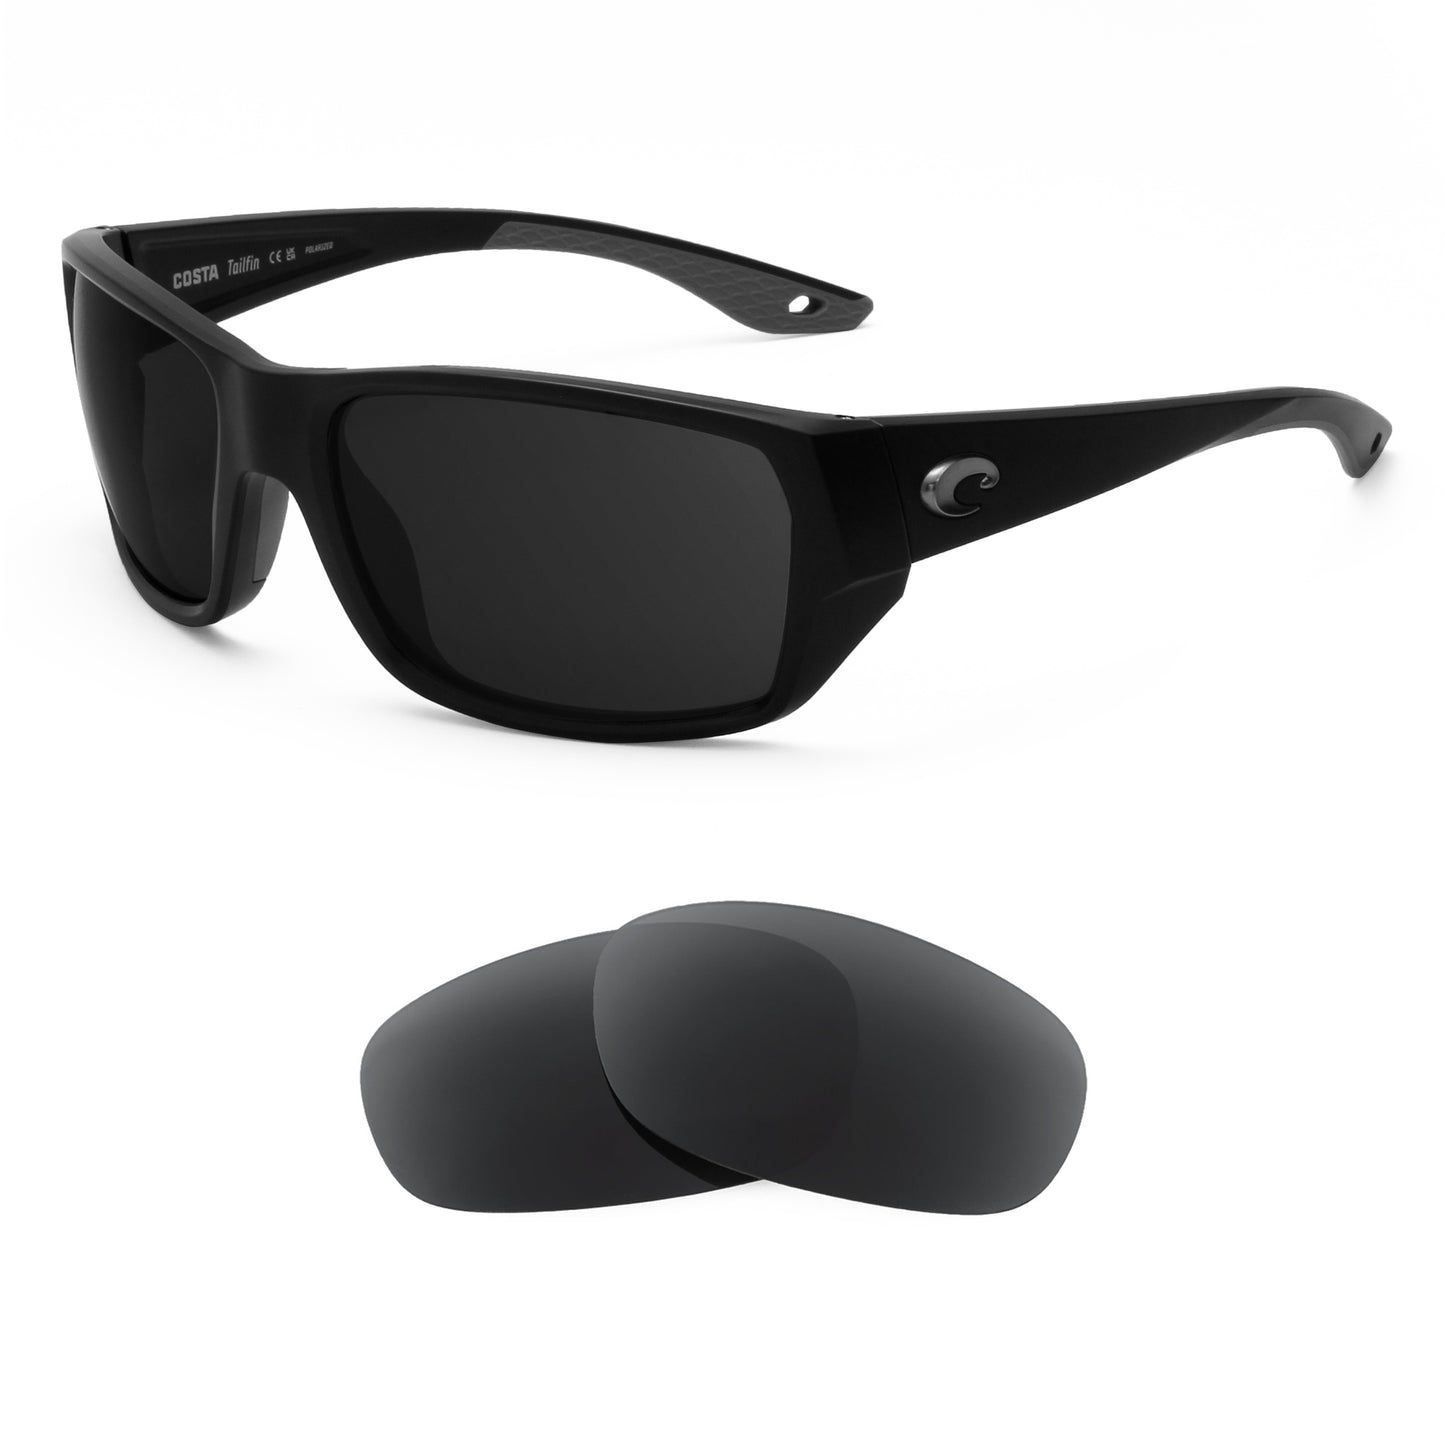 Costa Tailfin 57mm sunglasses with replacement lenses